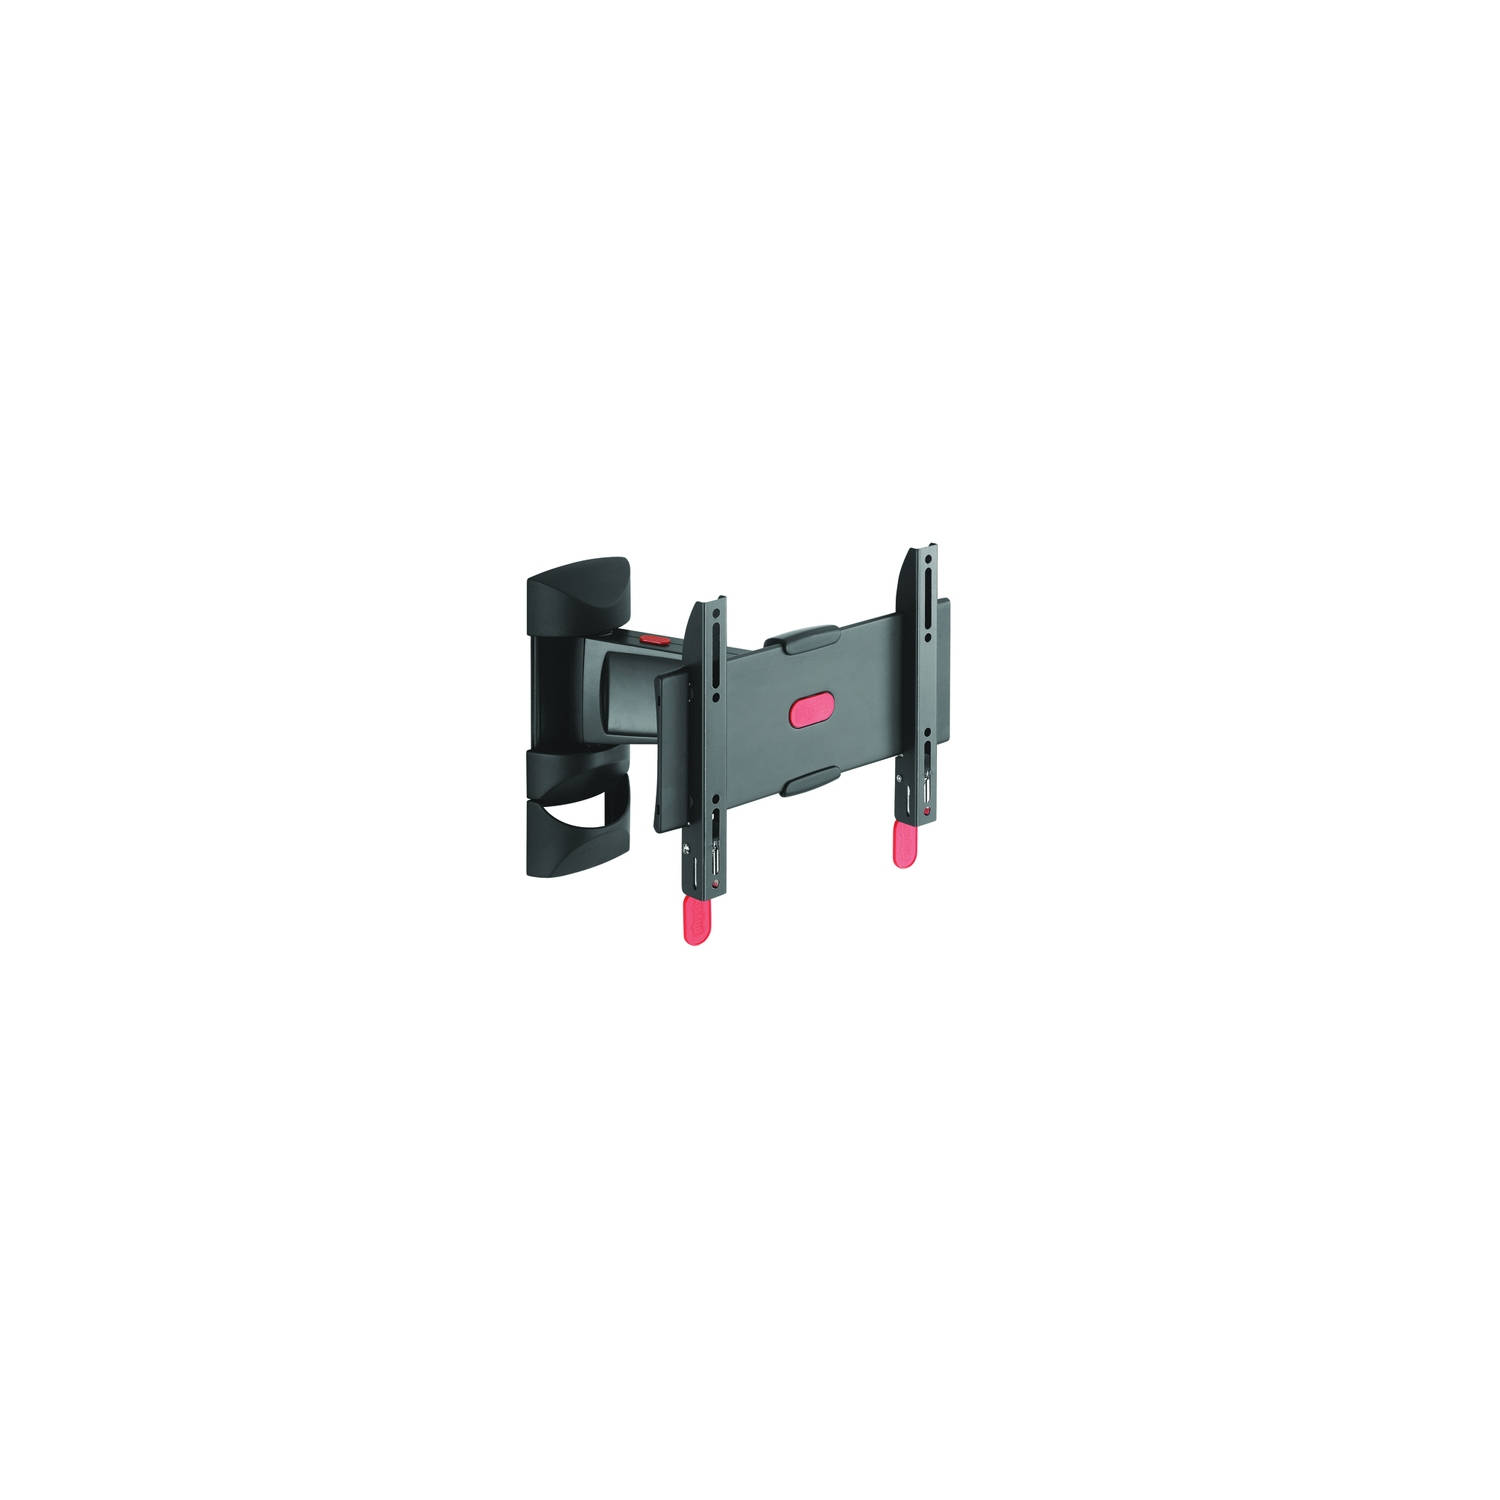 Schnepel Vogel's Physix TURN SMALL Mounting kit ( wall mount ) for LCD-plas (PHW 300S)